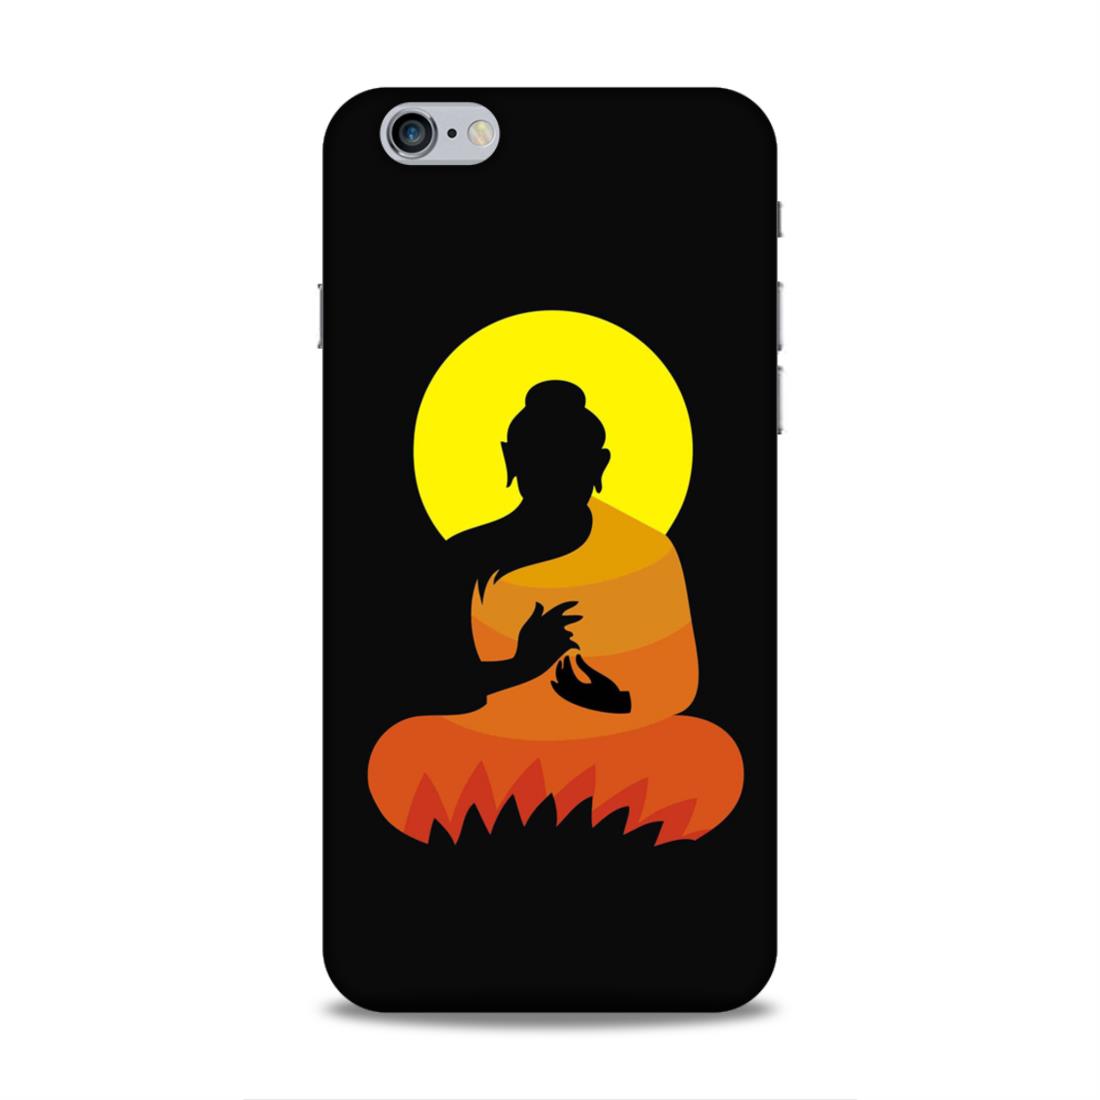 Lord Buddha Hard Back Case For Apple iPhone 6 Plus / 6s Plus